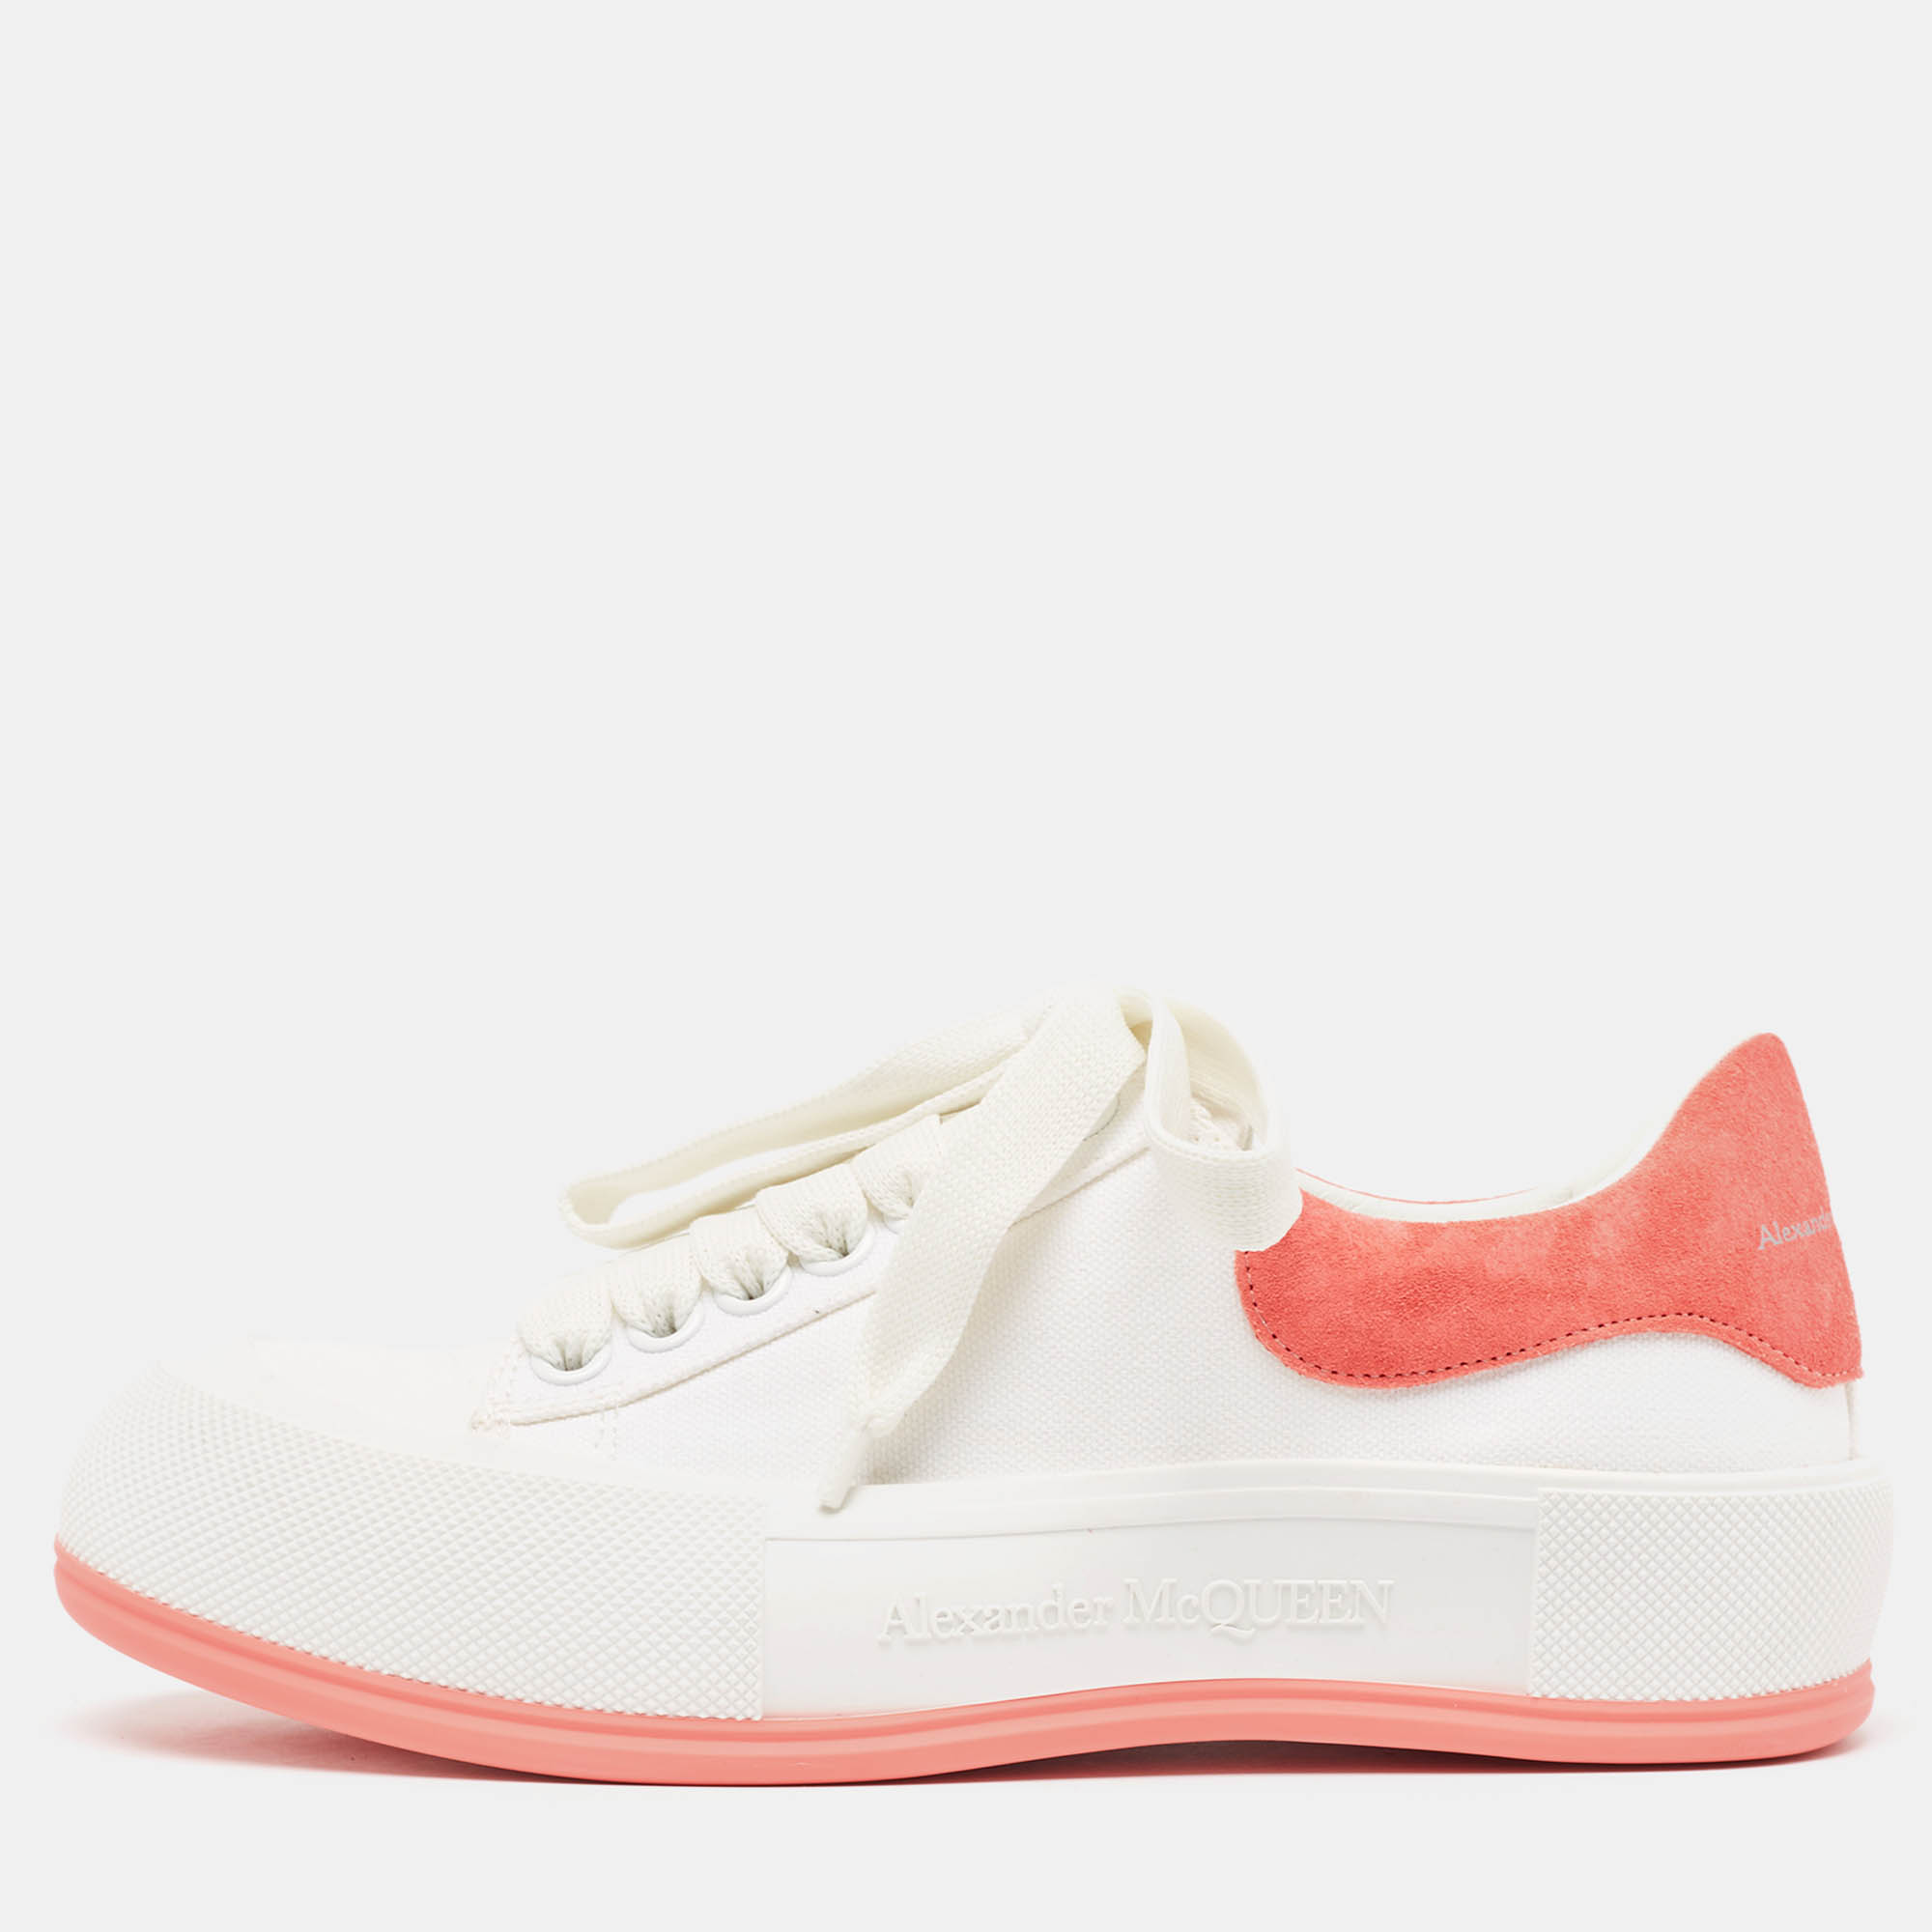 

Alexander McQueen White/Pink Canvas and Suede Deck Plimsoll Sneakers Size